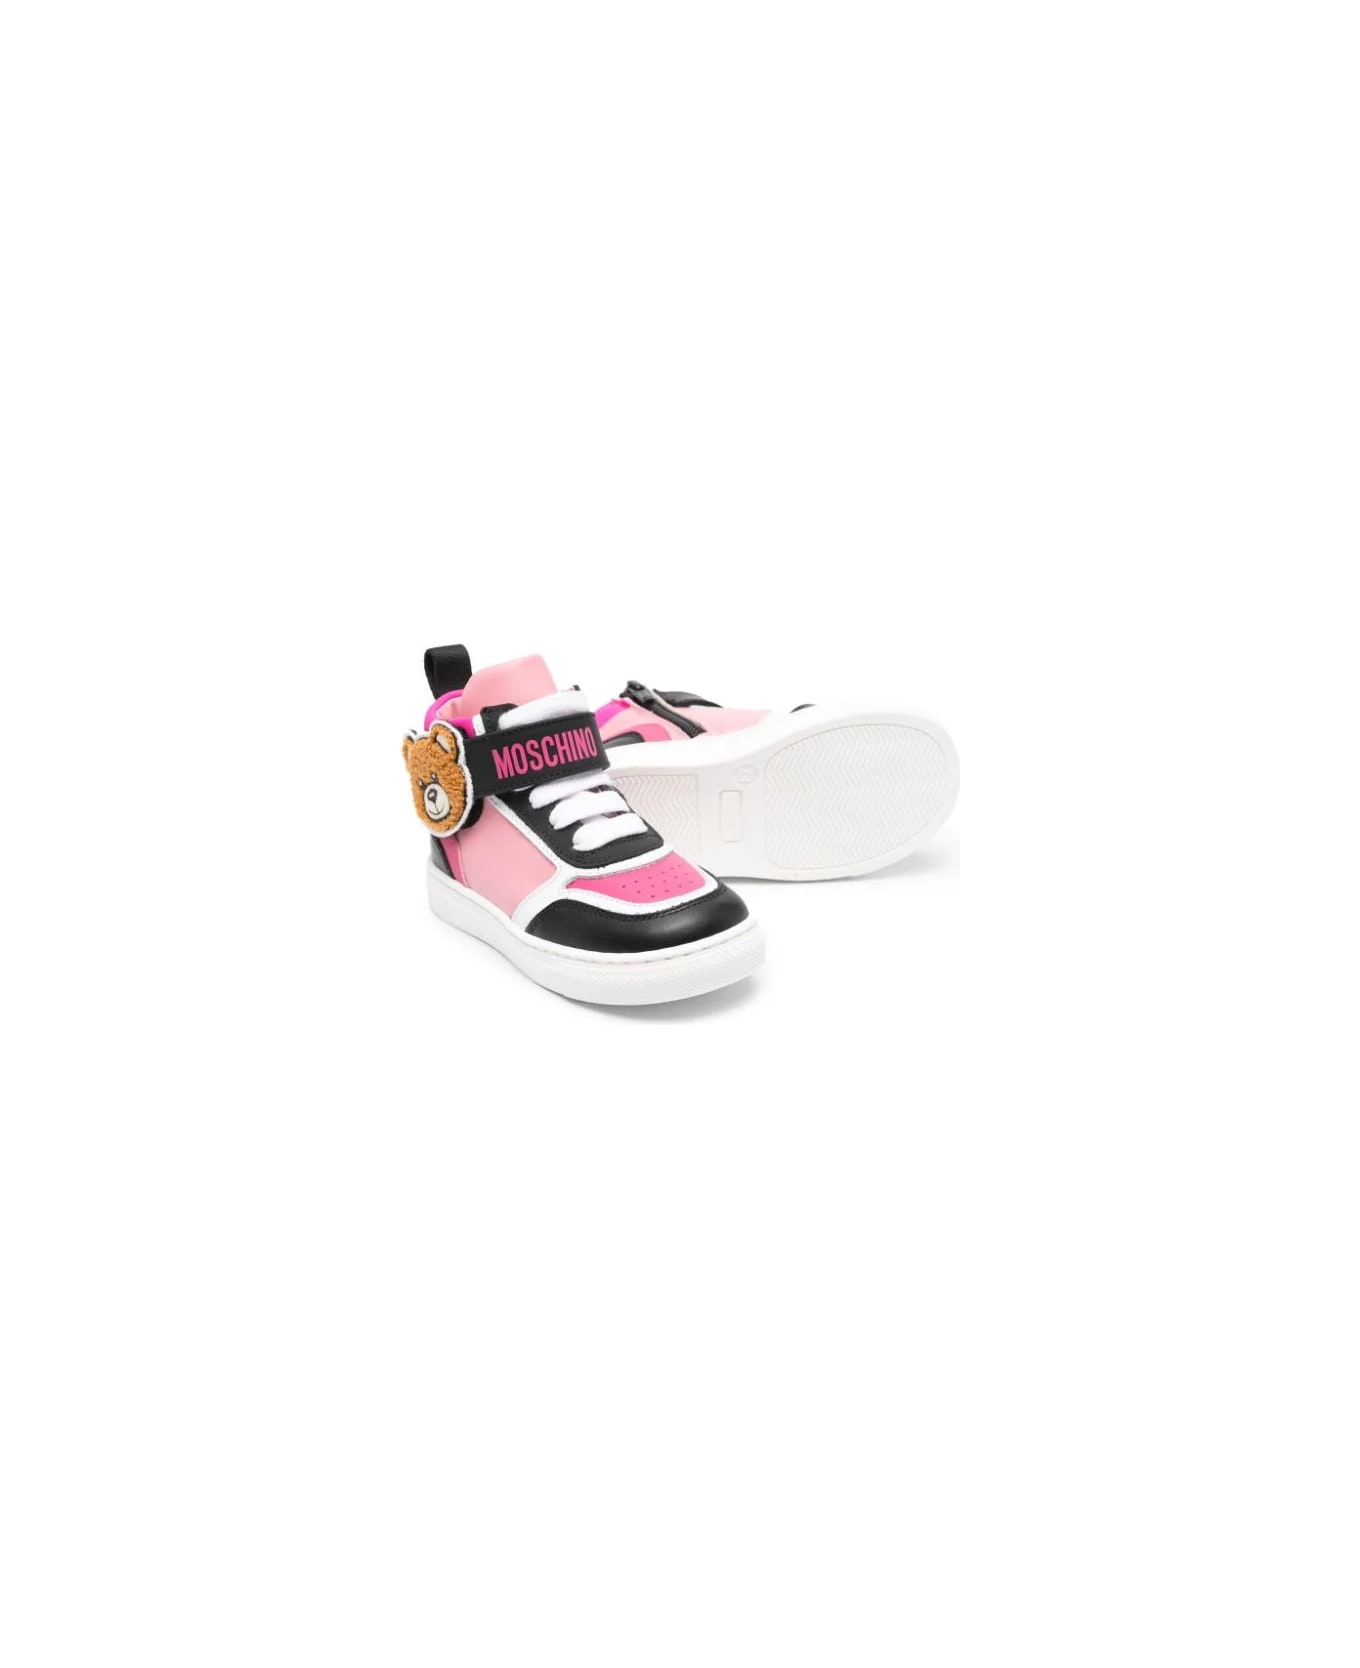 Moschino Sneakers Alte - Pink